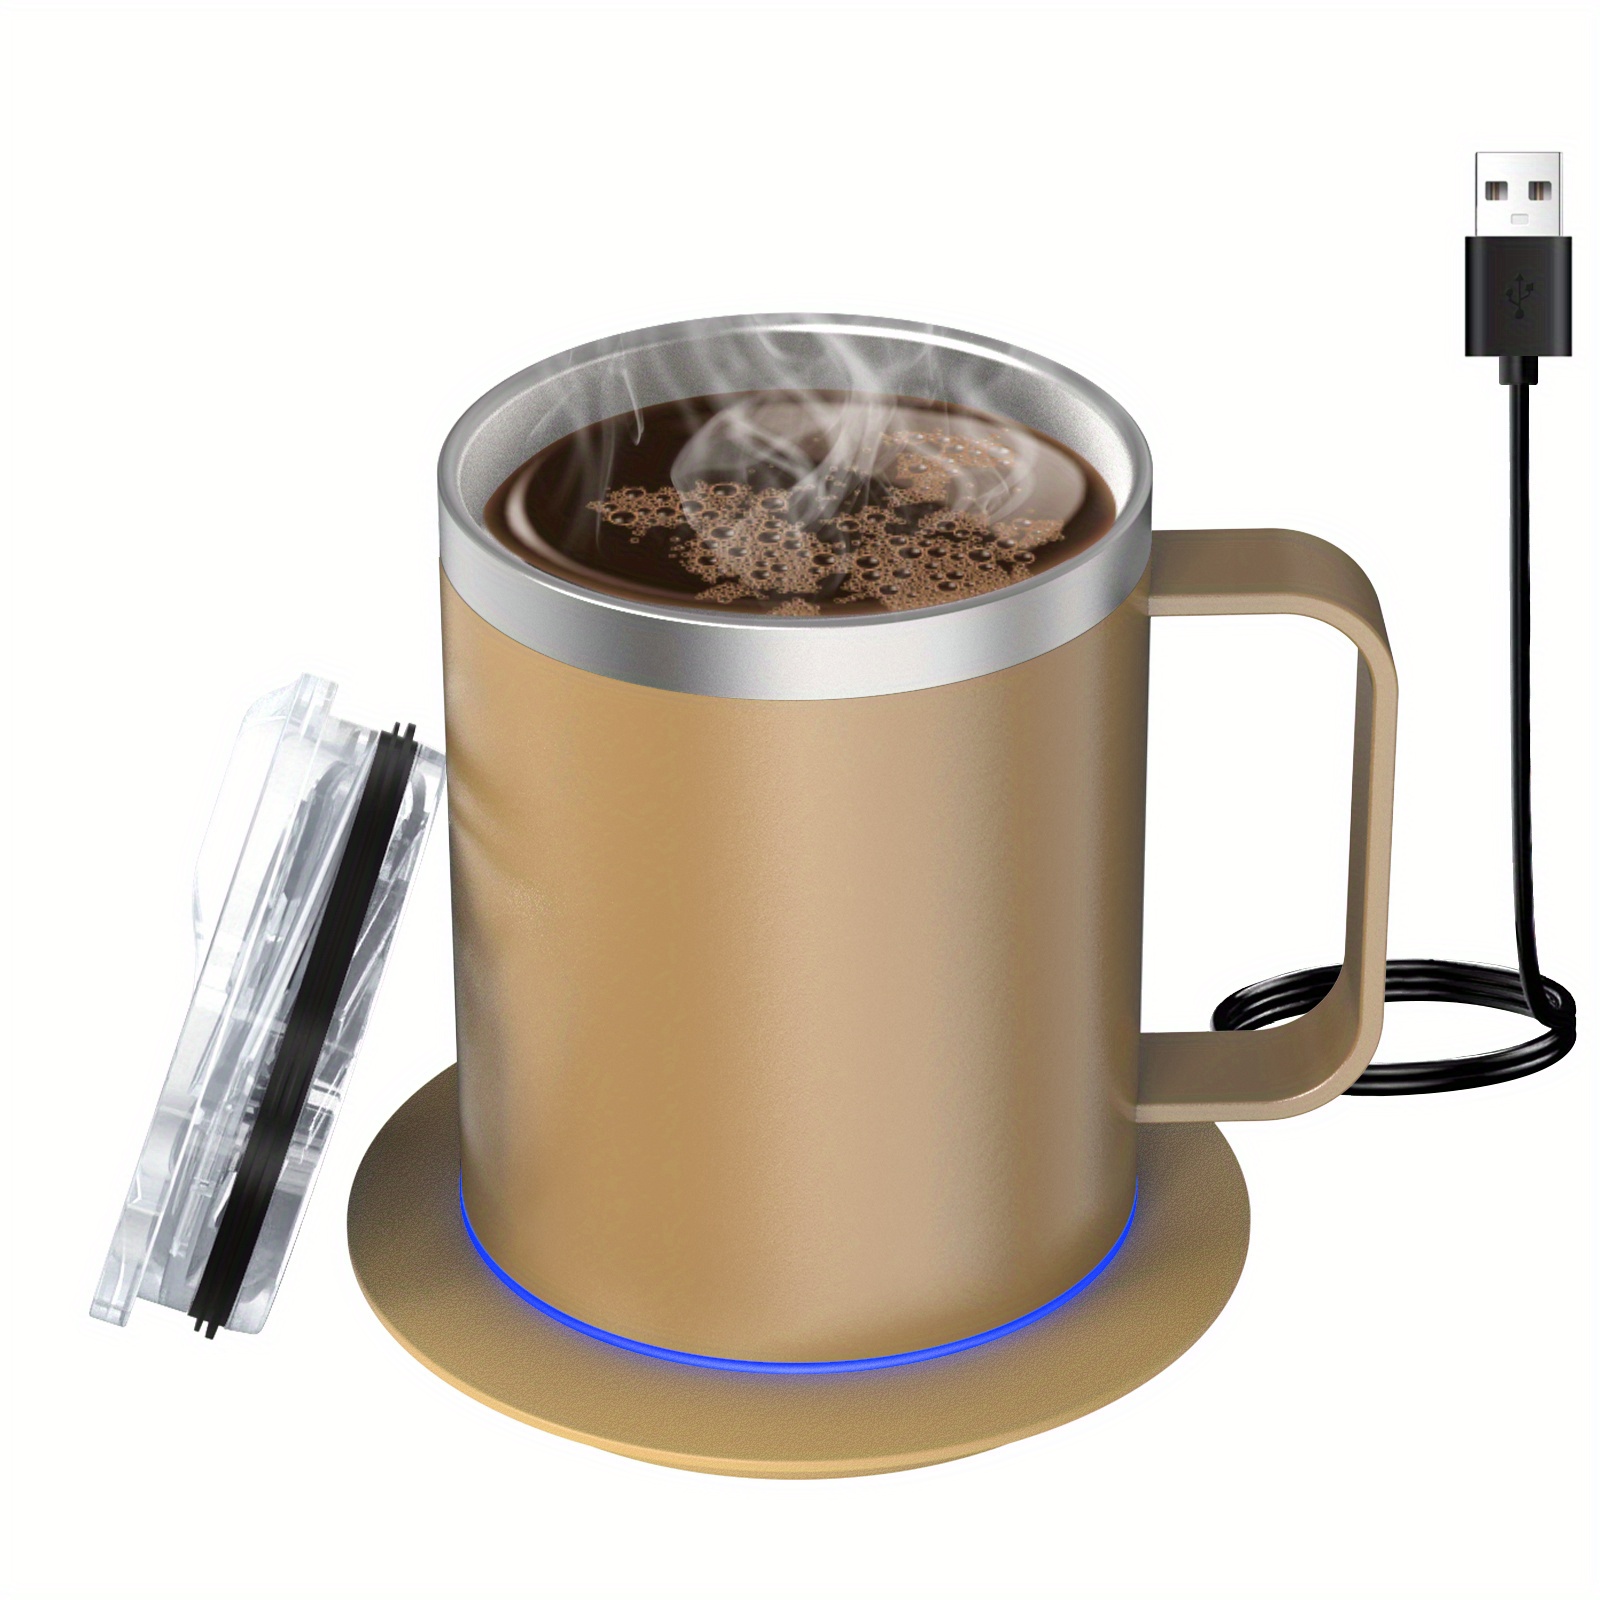 The 3 Mug Warmers We Love for Keeping Our Coffee (and Tea) Hot